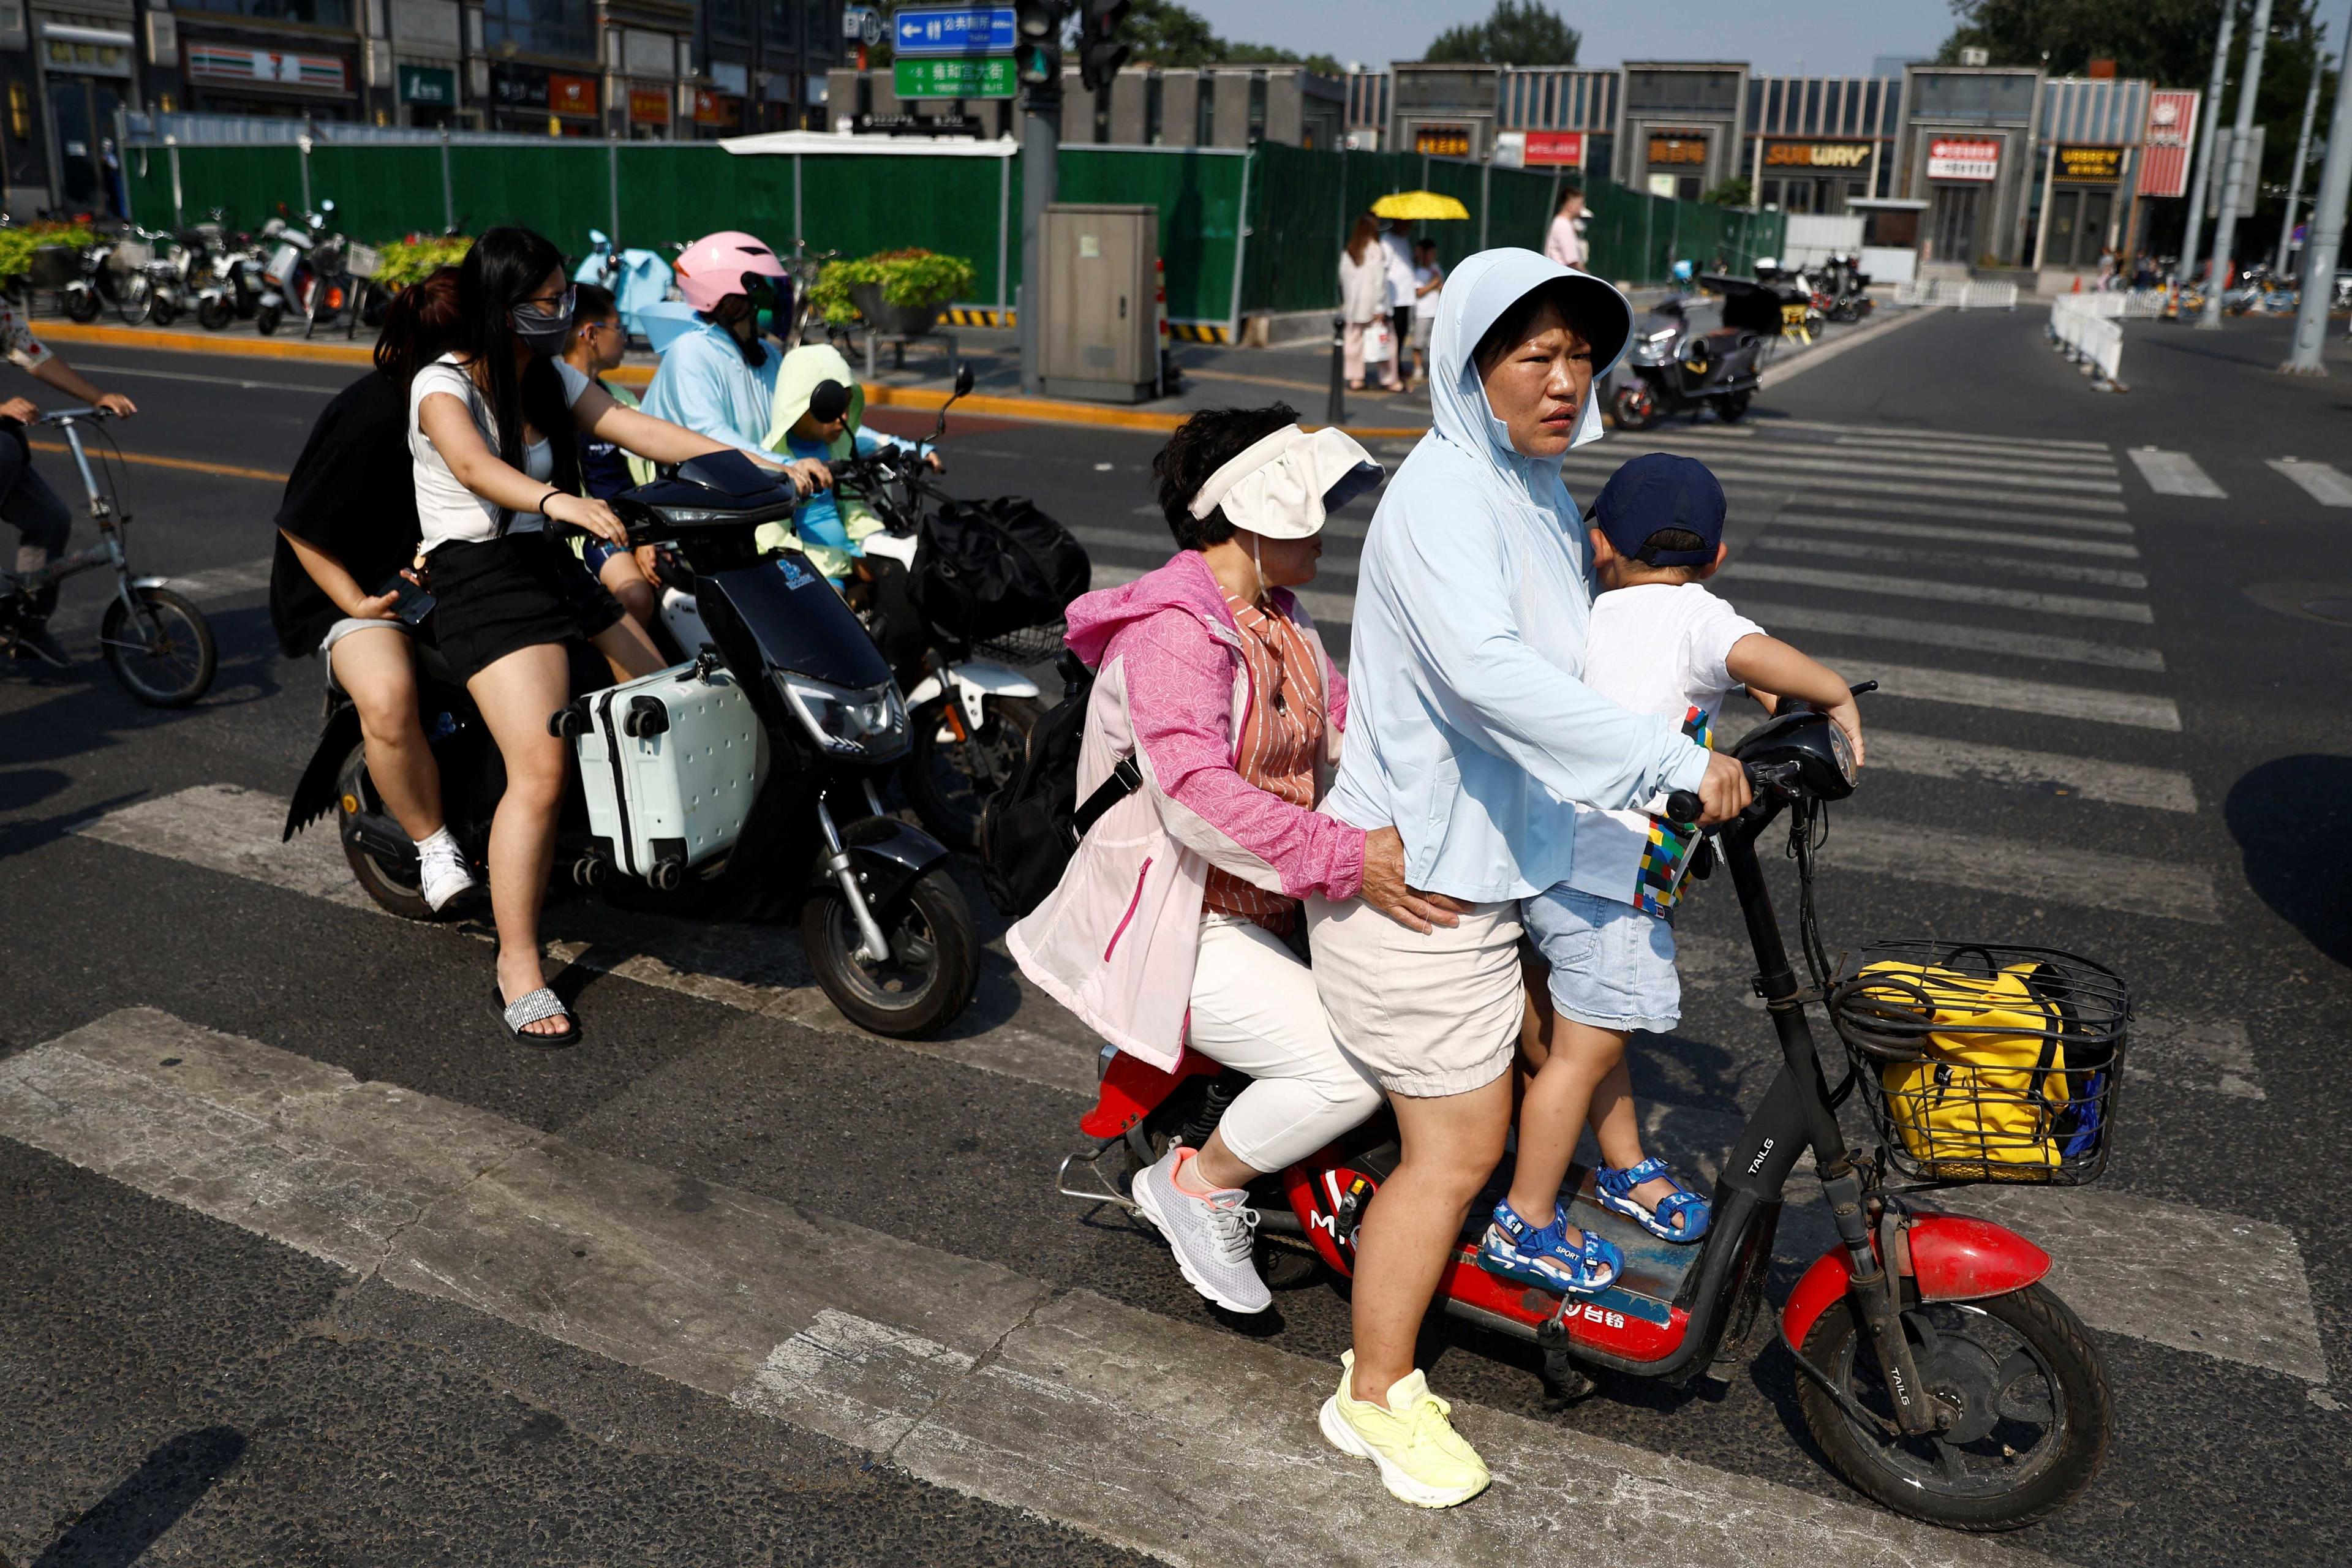 People ride on scooters amid a yellow alert for heatwave, at a street in Beijing, China July 19. Photo: Reuters